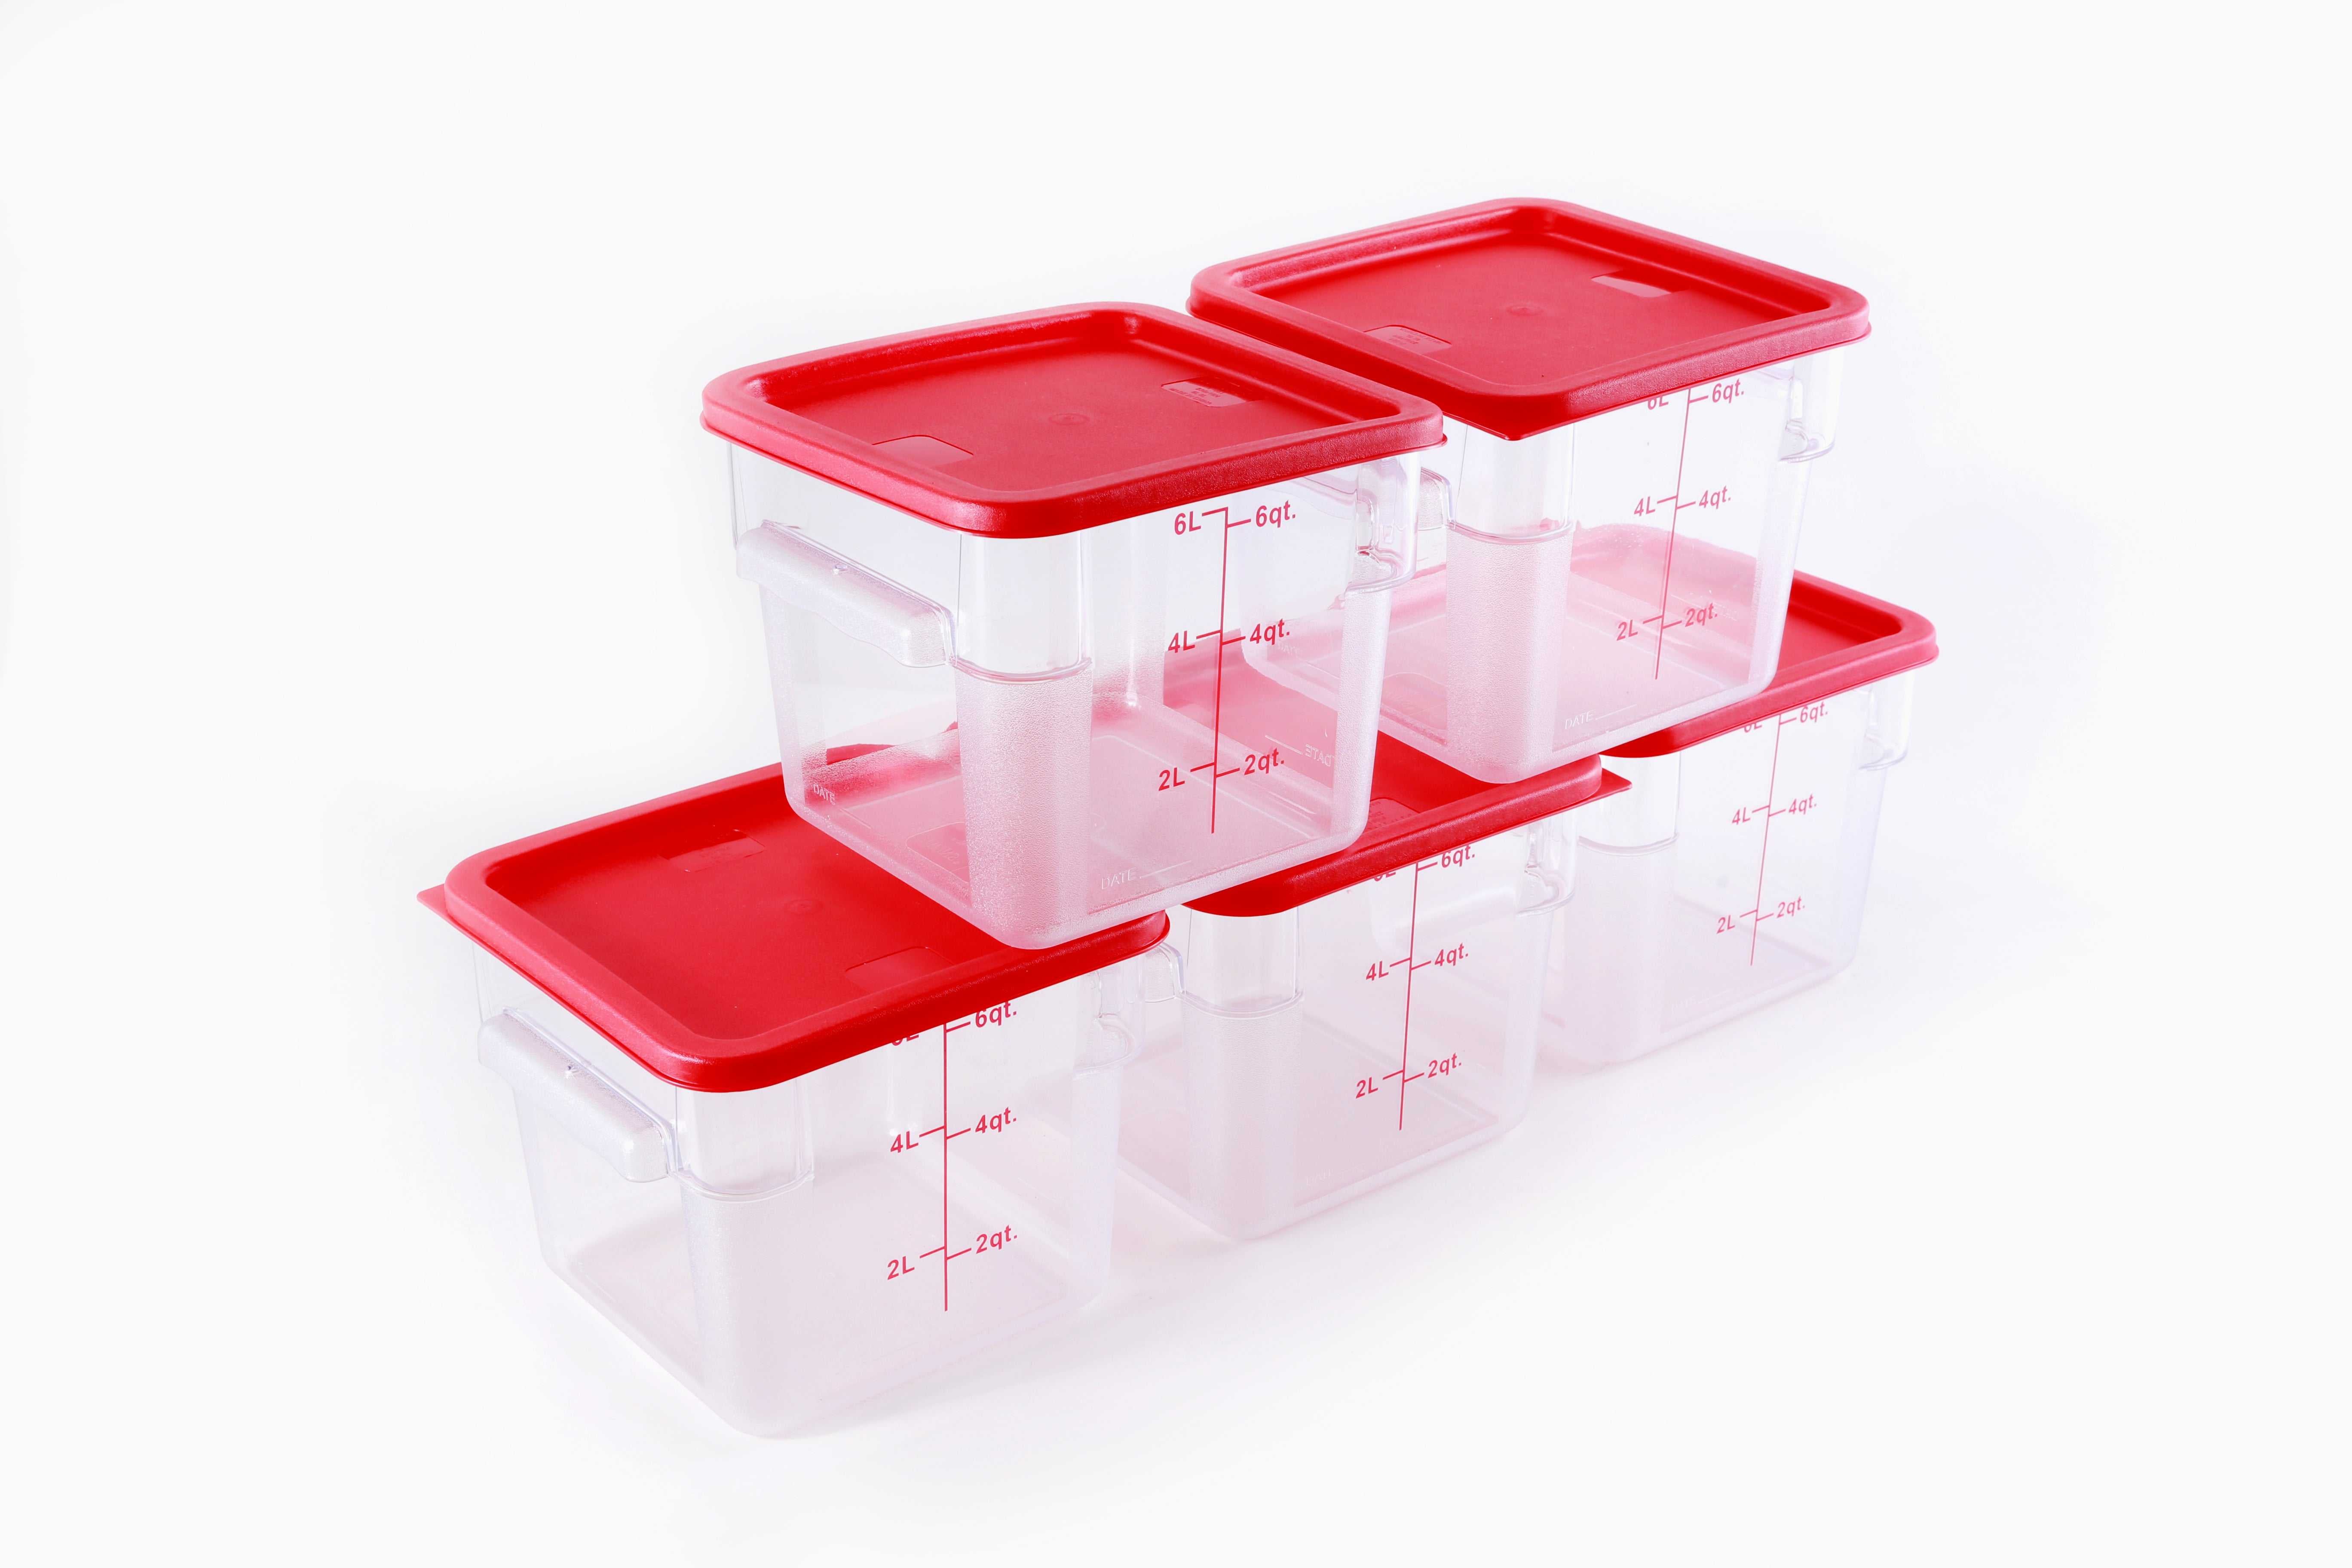 Hakka 2 Qt Commercial Grade Square Food Storage Containers With  Lids,Polycarbonate,Clear - Case of 5